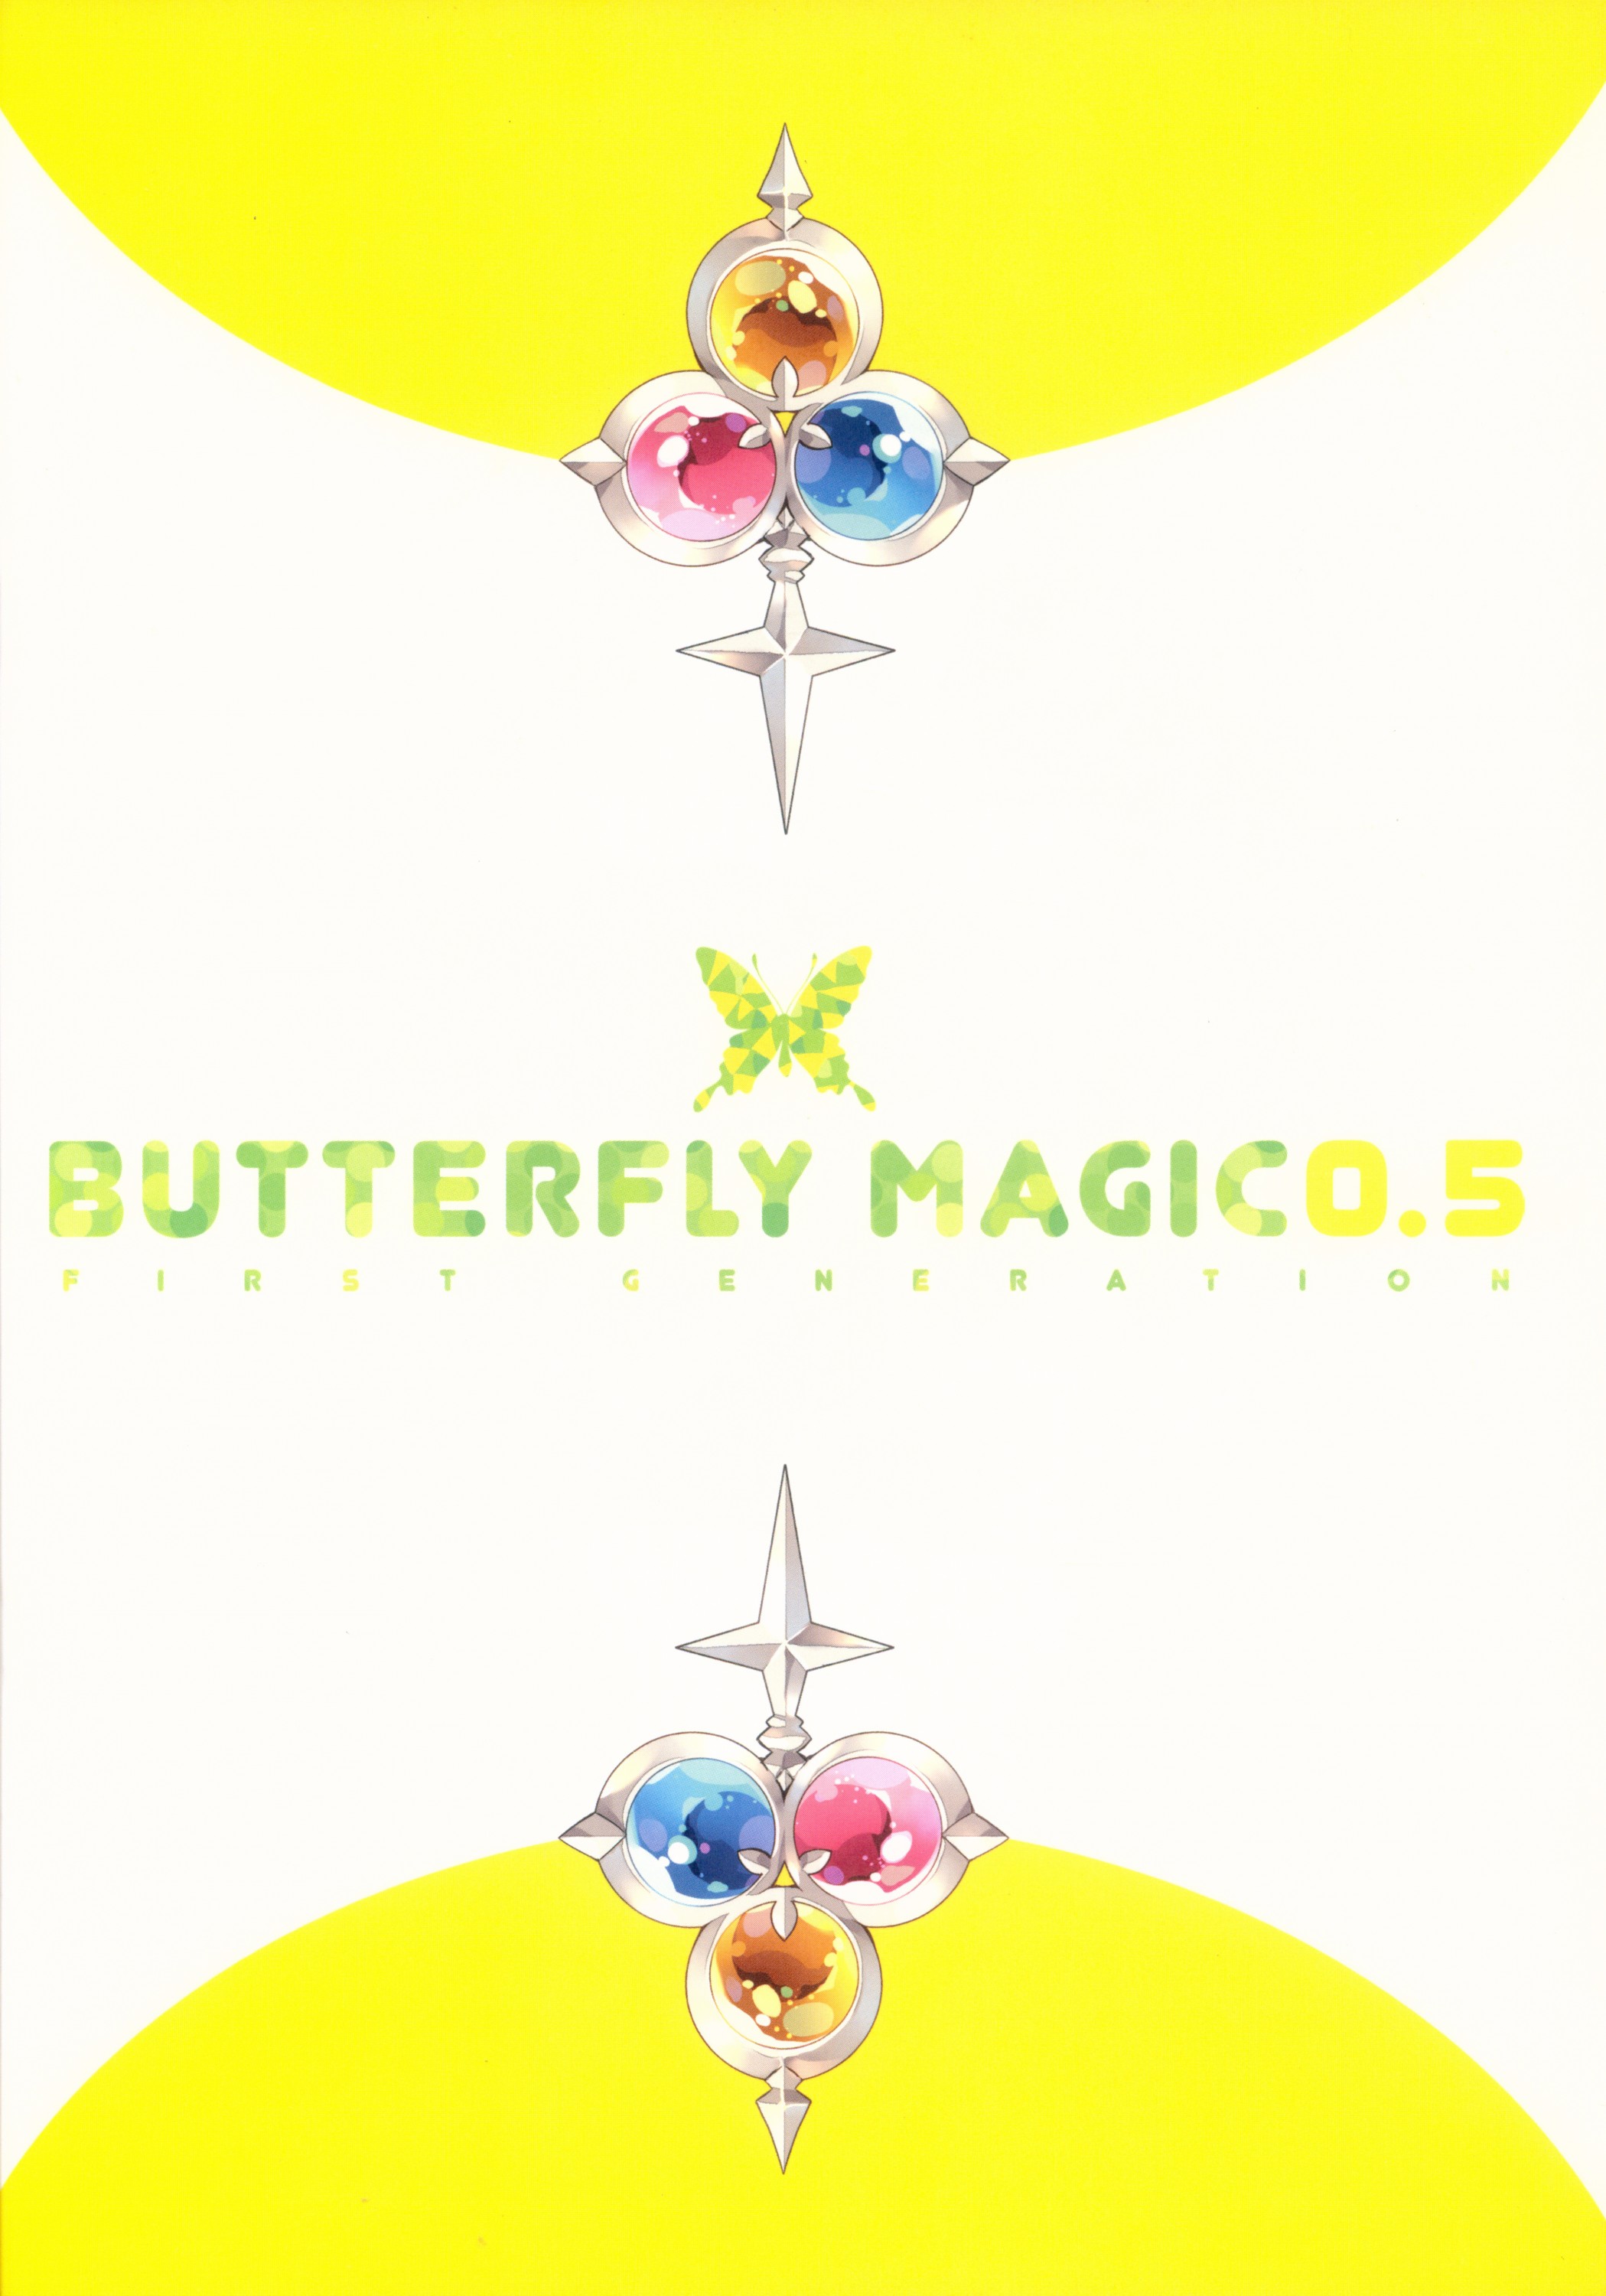 Butterfly Magic 0.5 first generation image by Kim Eunhye (Nardack)